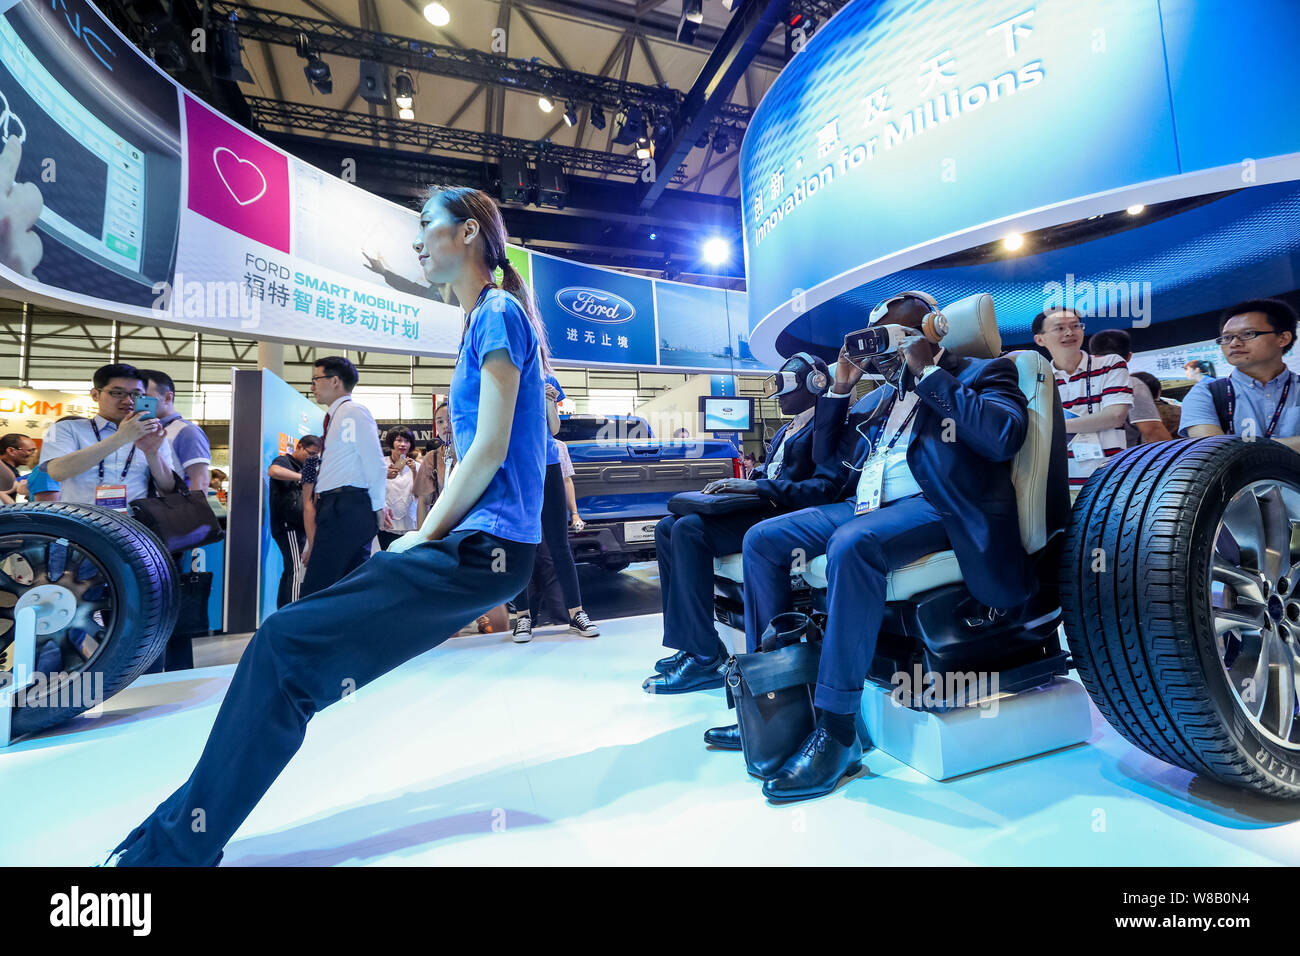 Visitors try out VR (Virtual Reality) devices of Ford Smart Mobility during the 2016 Mobile World Congress (MWC) in Shanghai, China, 29 June 2016.   T Stock Photo